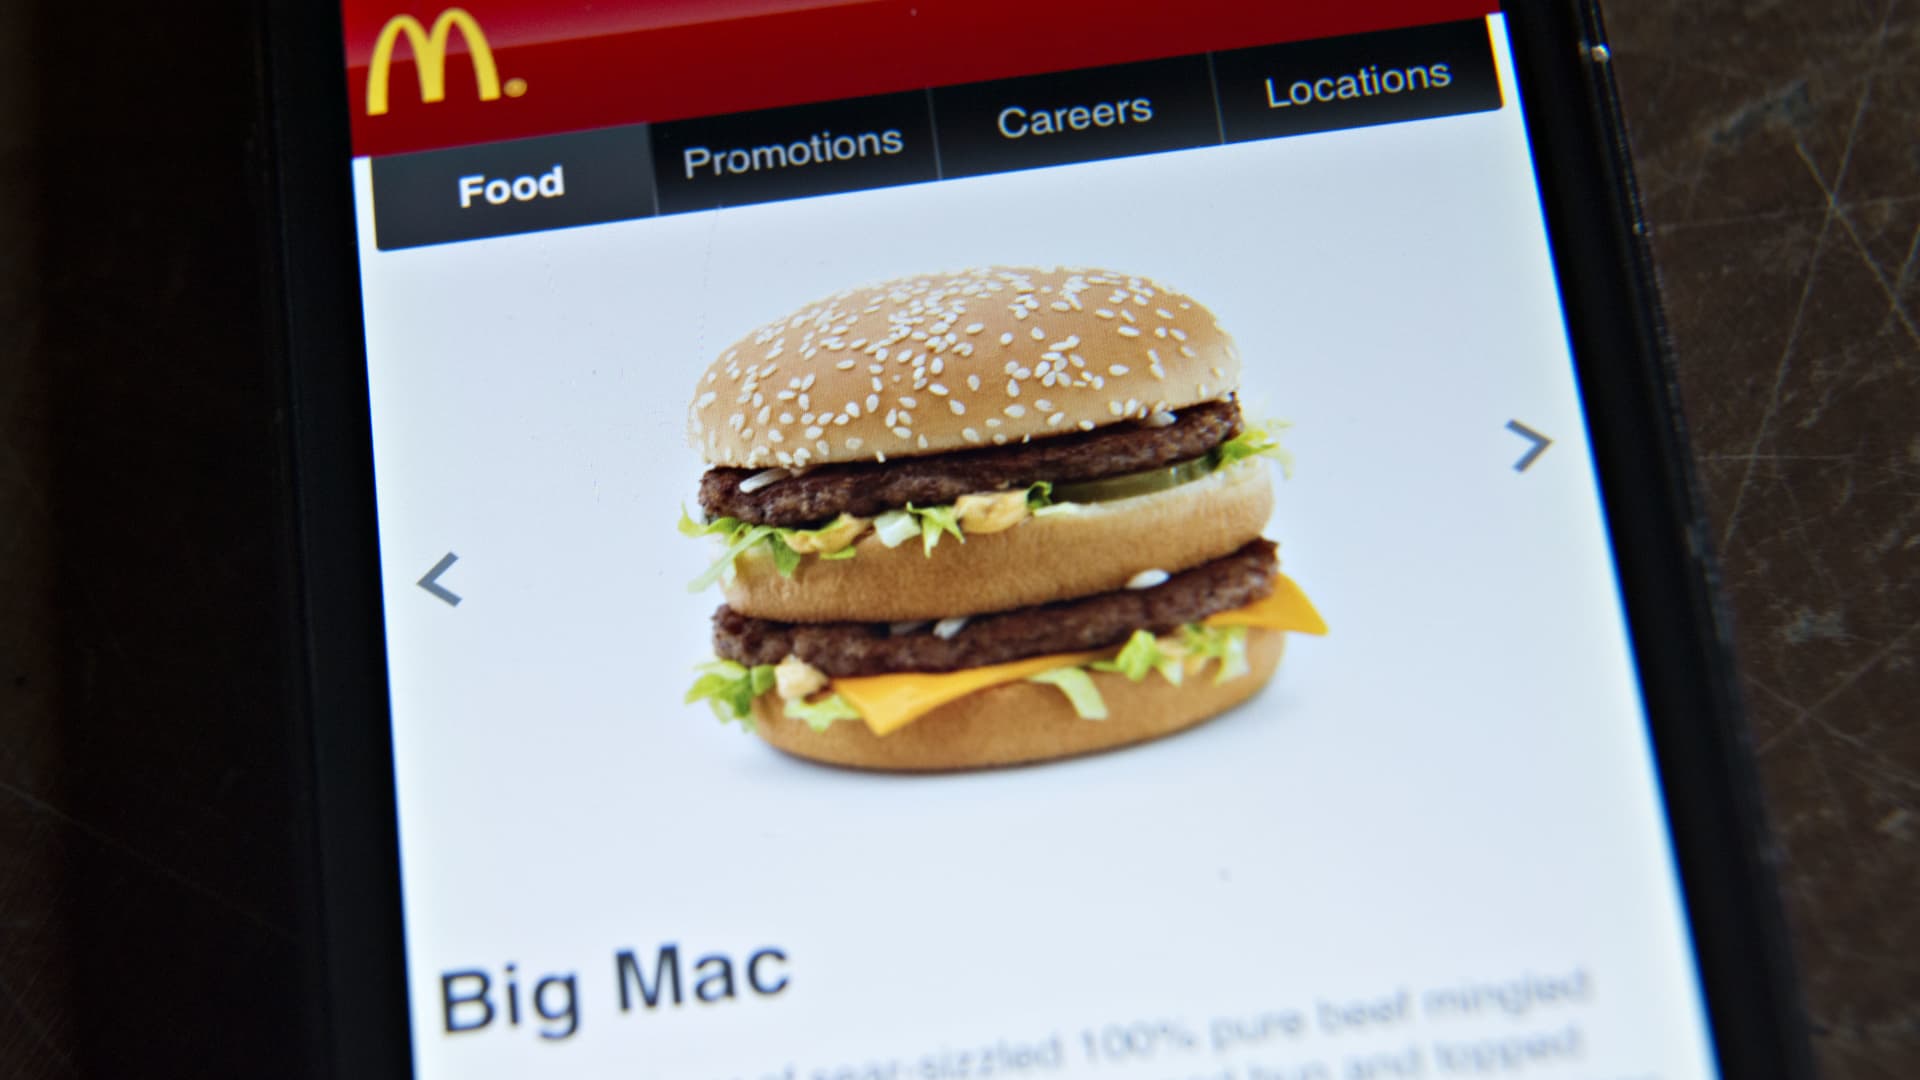 McDonald’s implements modifications to boost mobile sales